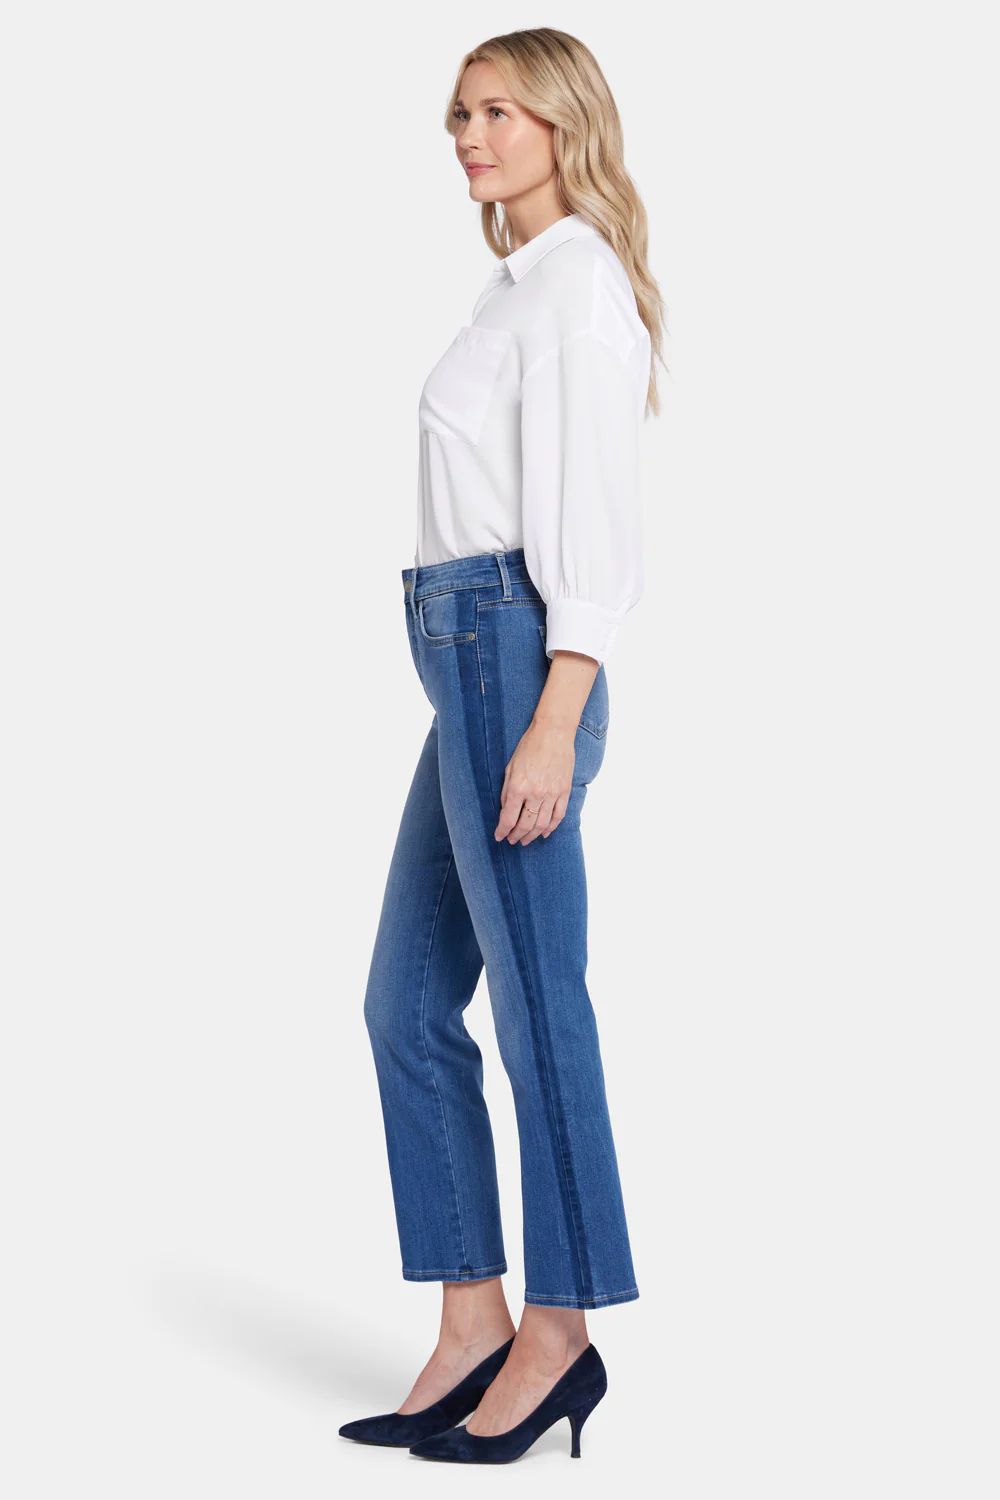 Marilyn Straight Ankle Jeans - Azure Wave | NYDJ